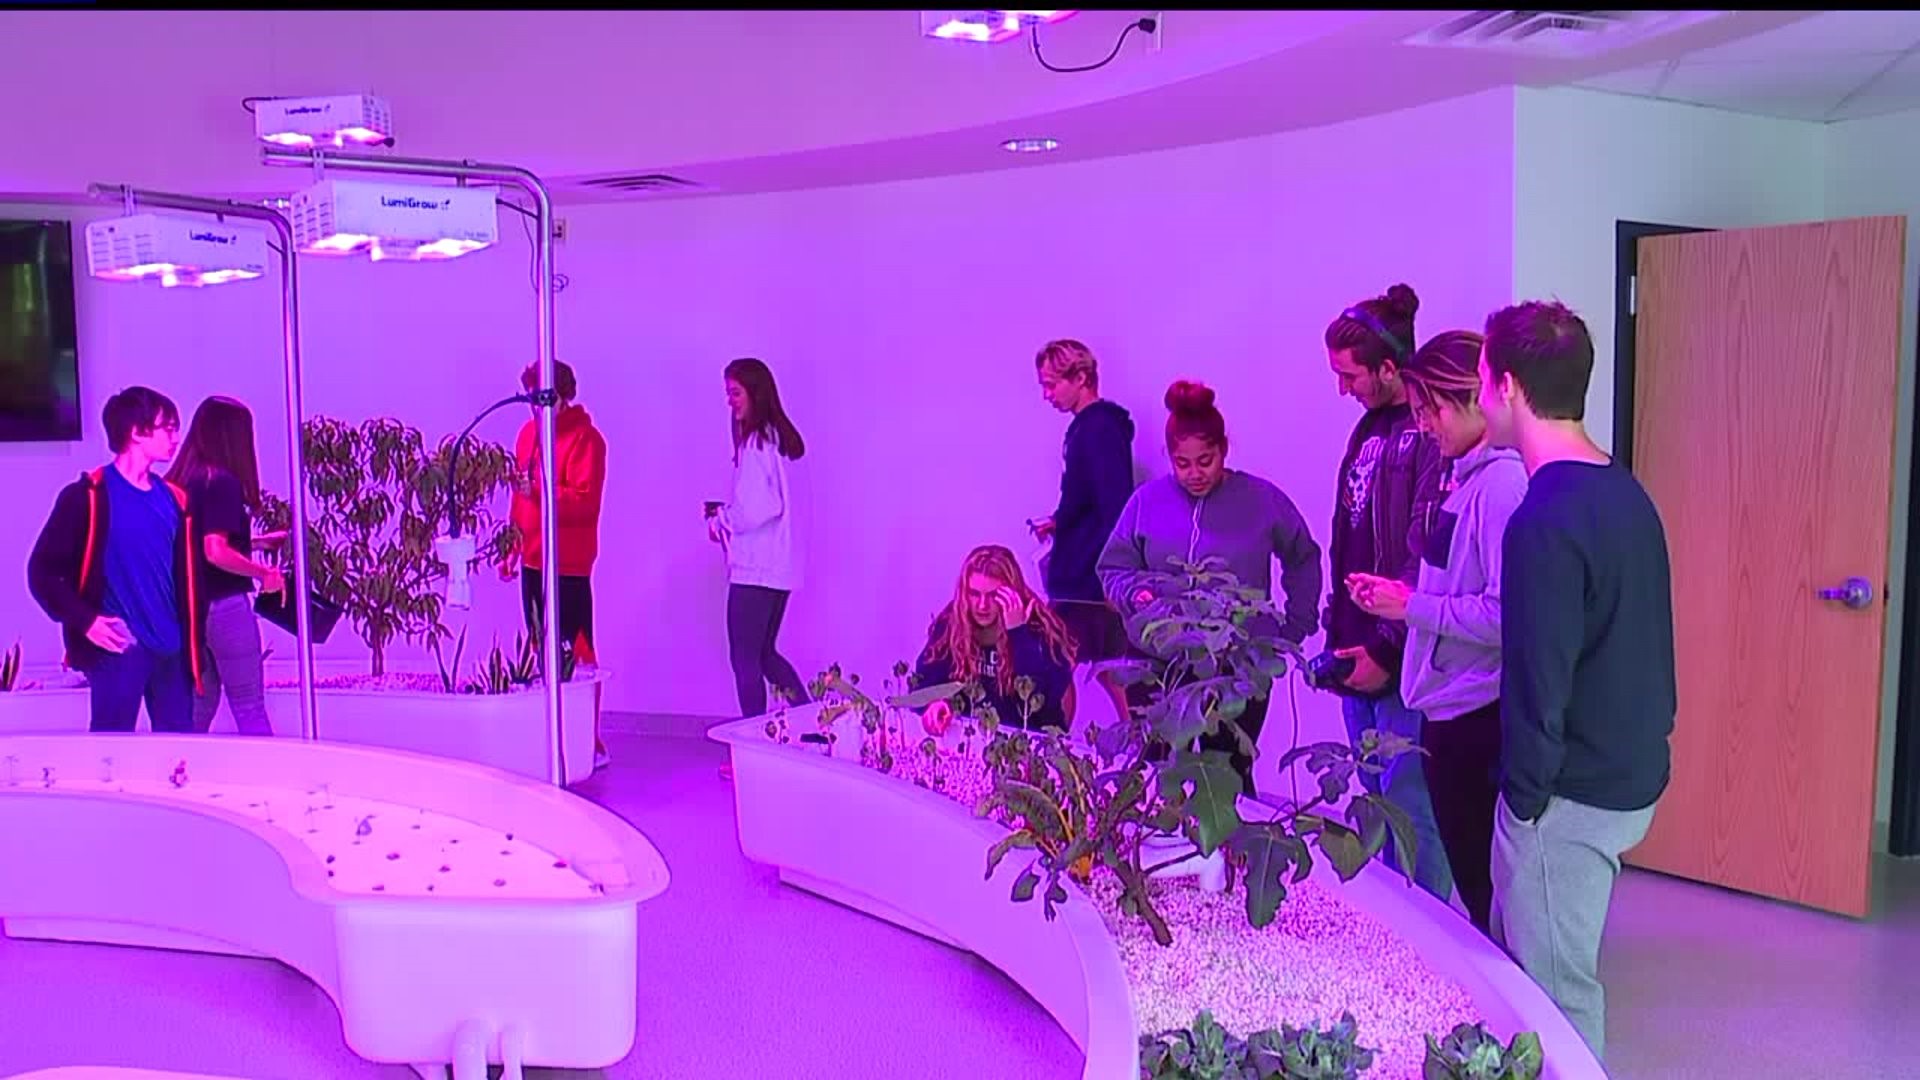 New Aquaponics Lab Teaches Science, Business and More